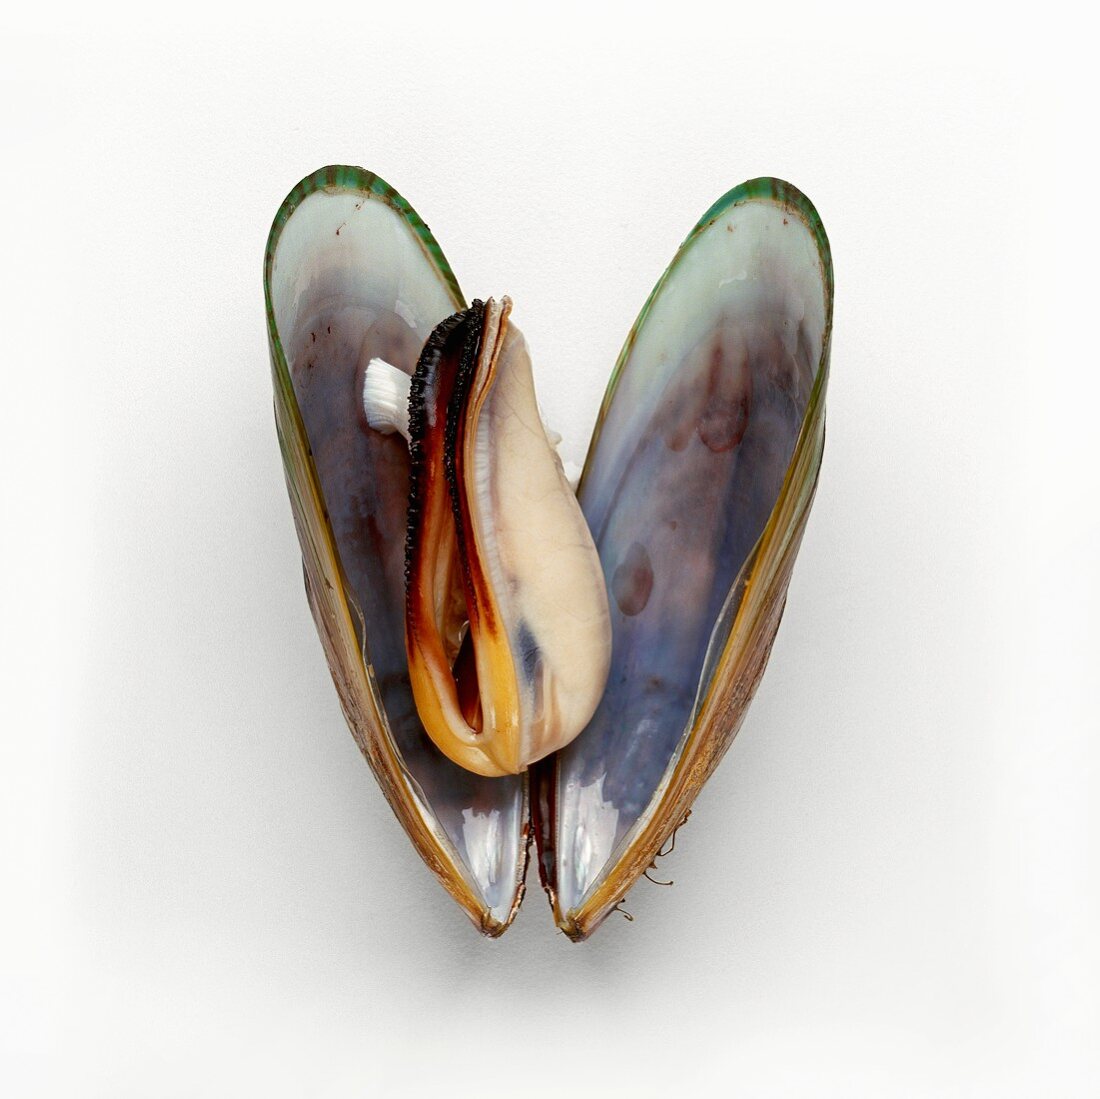 Opened New Zealand Green Mussel on White